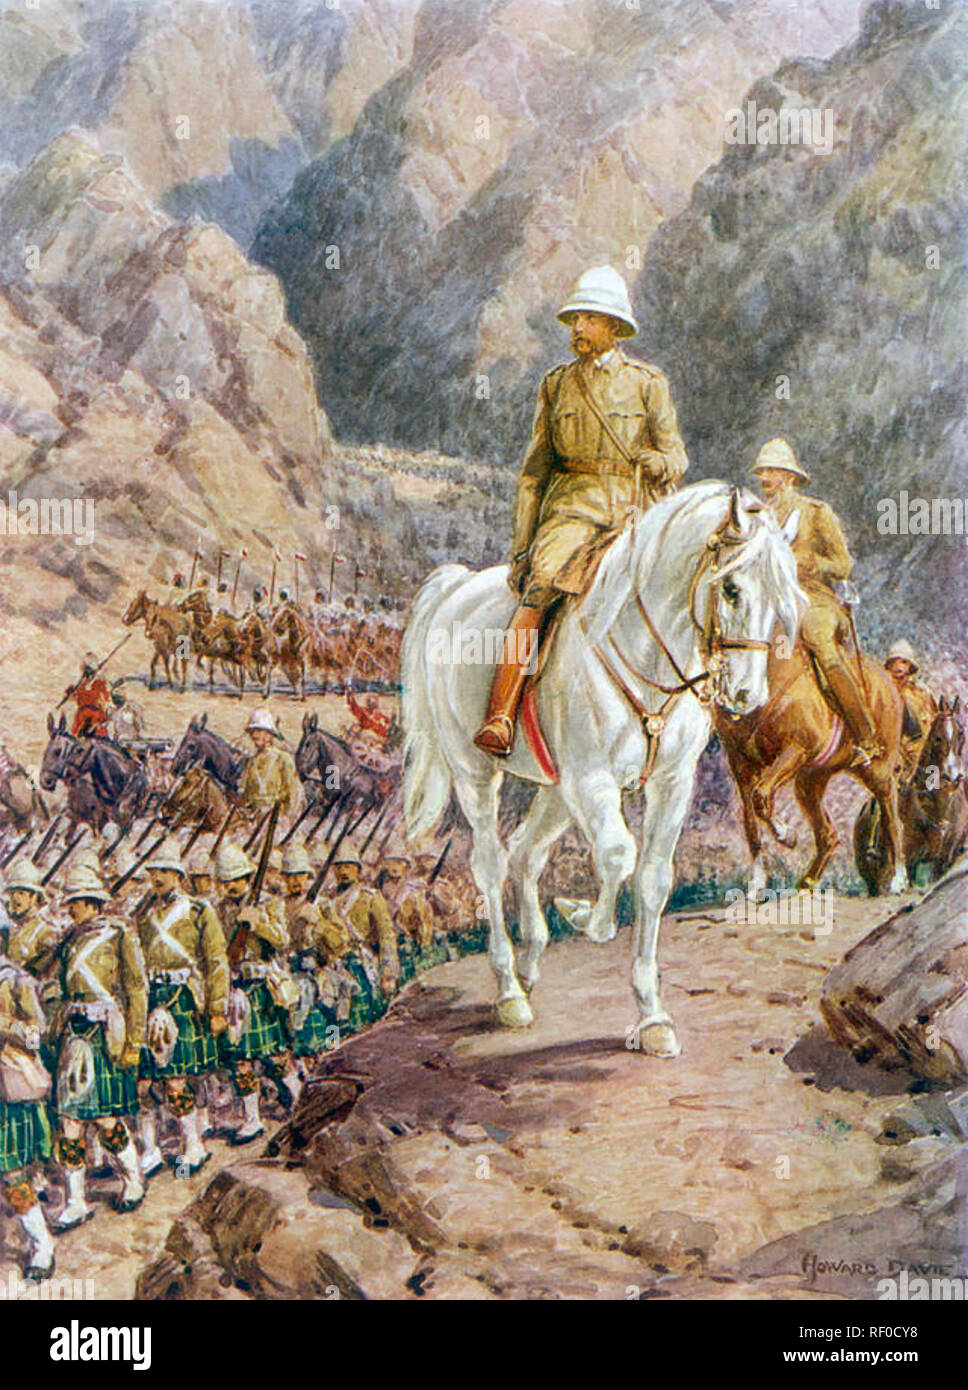 FREDERICK ROBERTS, 1st Earl Roberts (1832-1914) British army officer here shown with his soldiers in the Khyber Pass during the Second Anglo-Afghan War Stock Photo